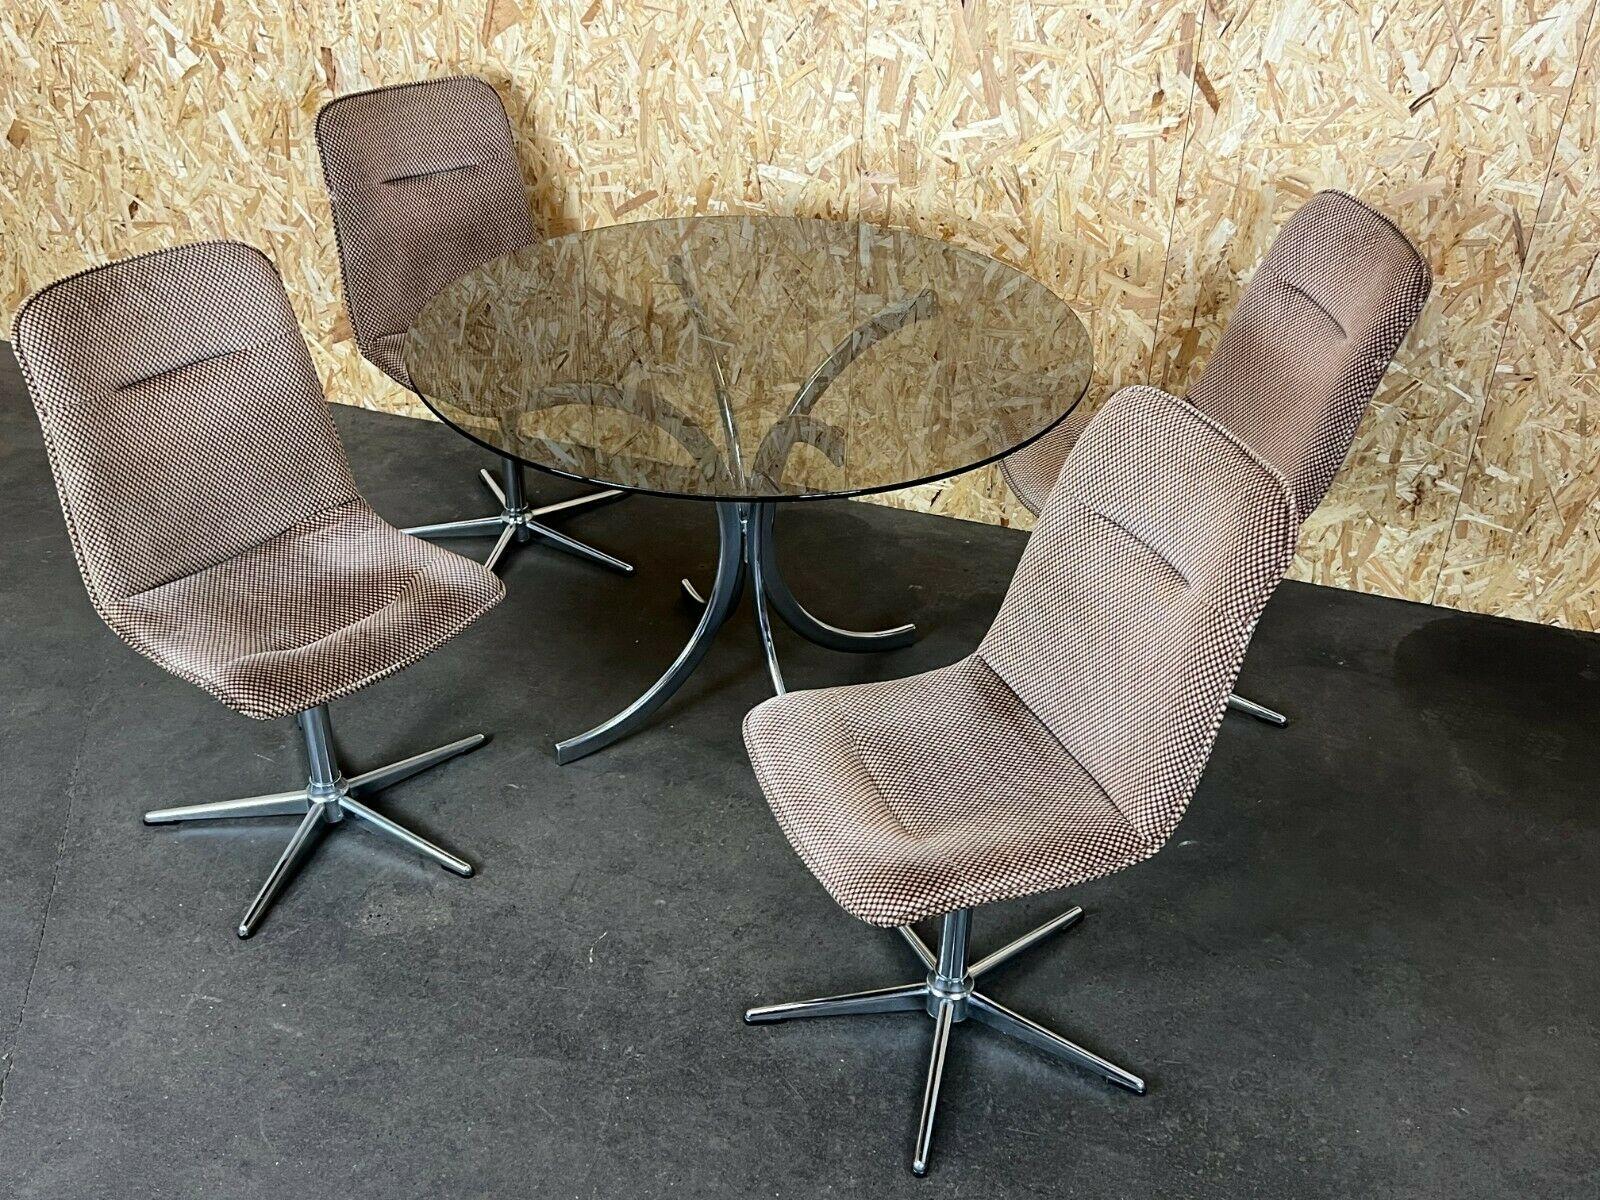 70's dining chairs